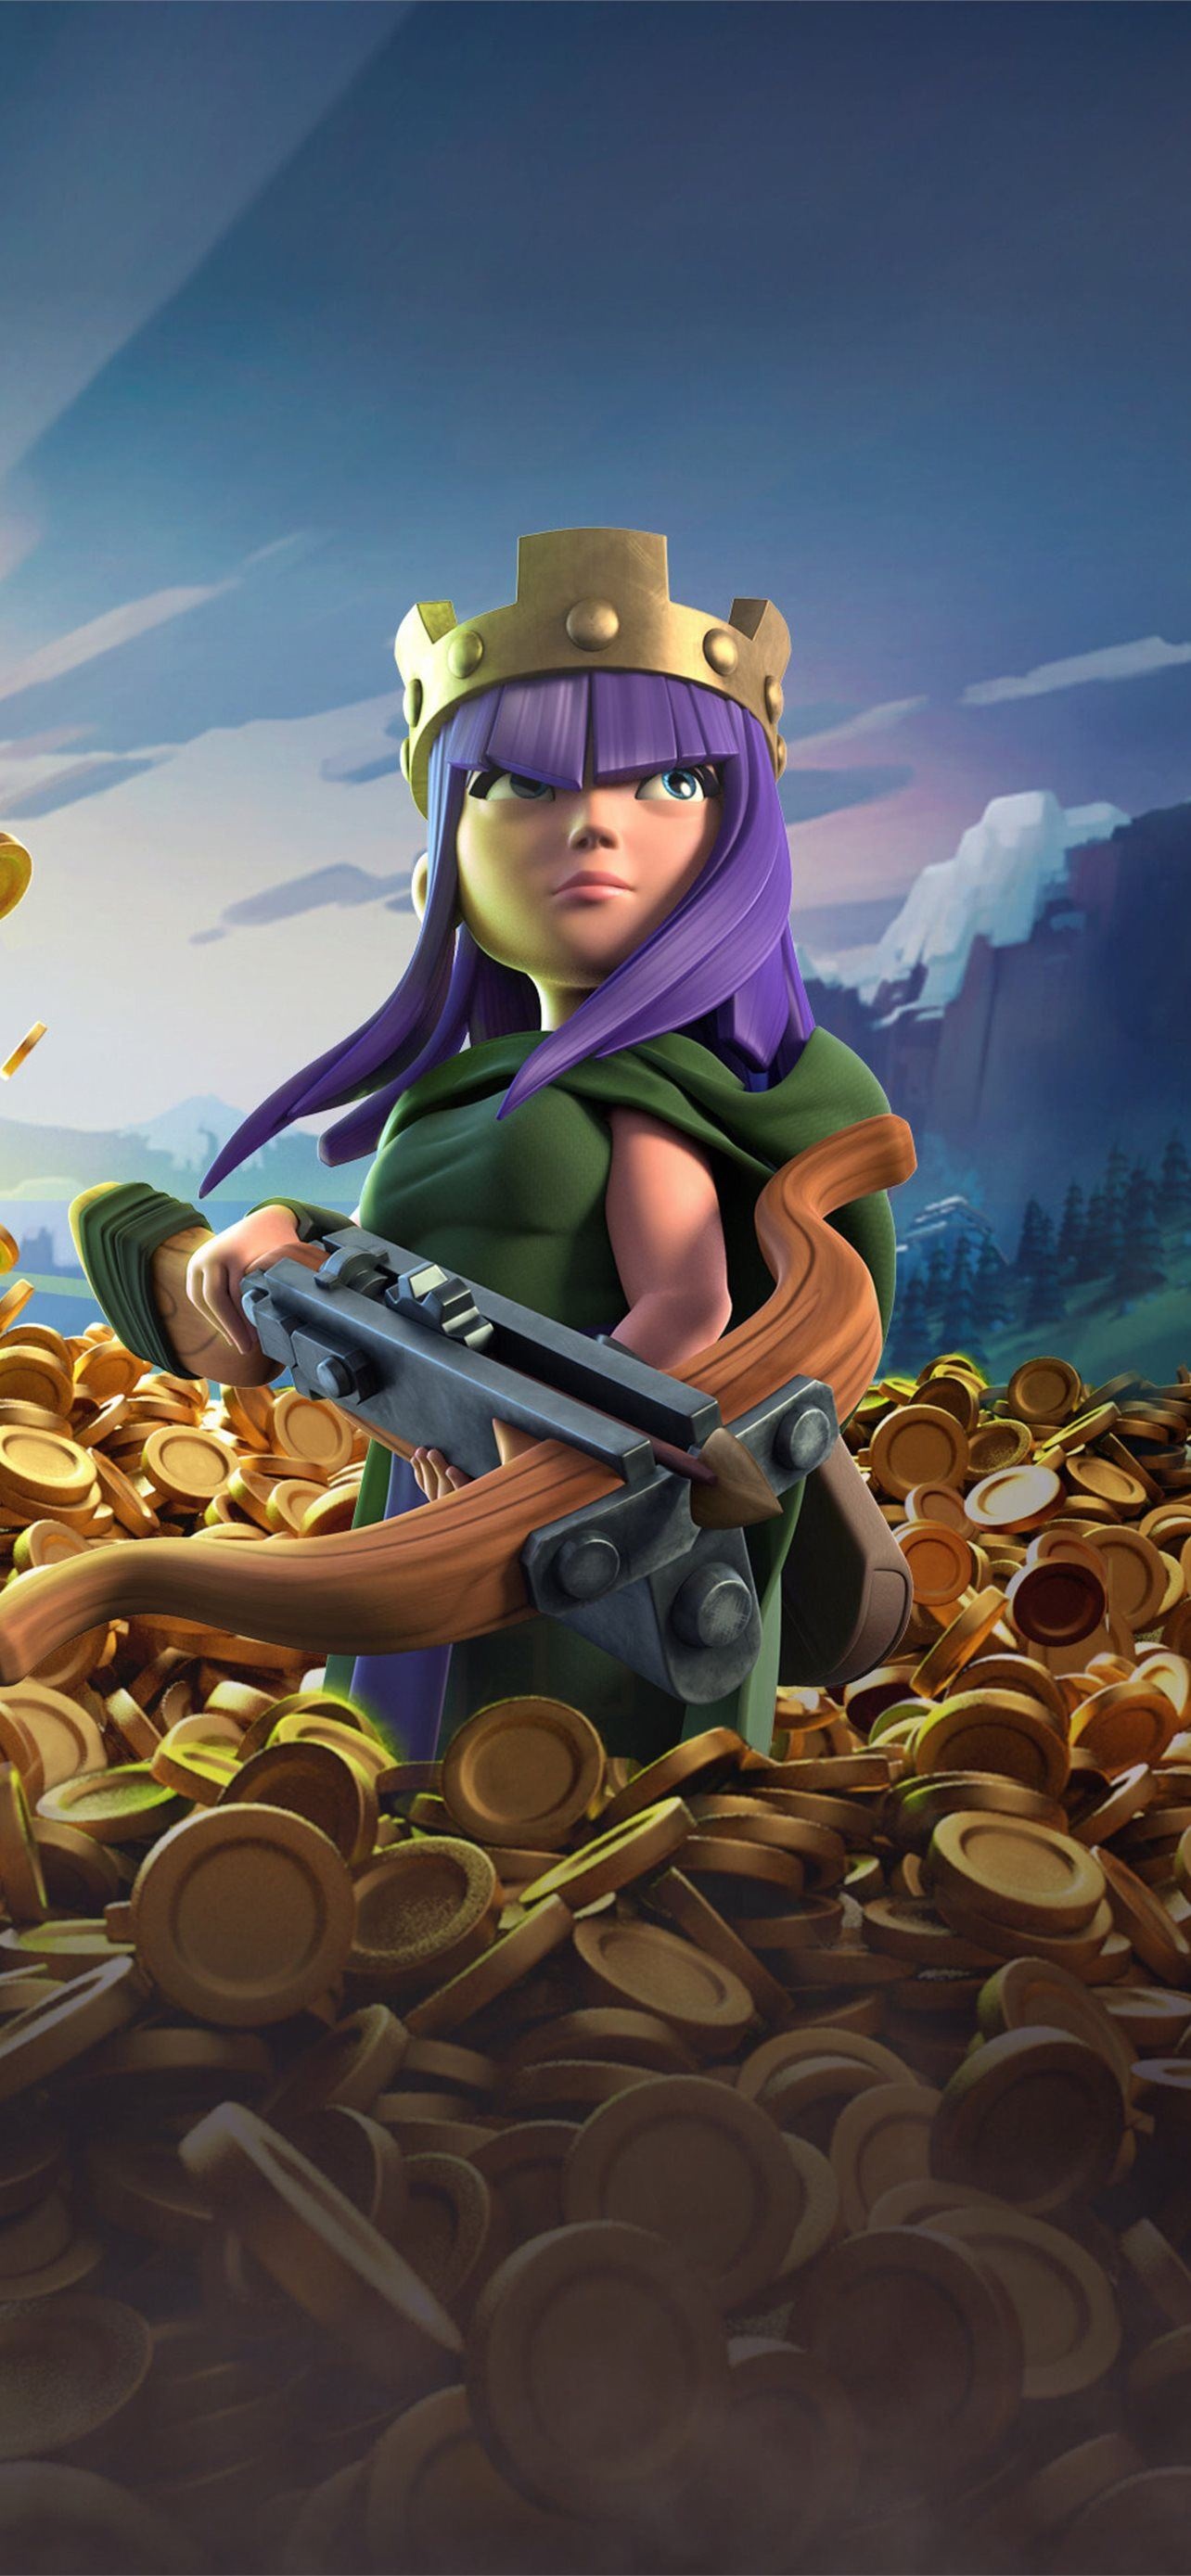 Clash of Clans: Archer Queen, The second Hero, being unlocked at Town Hall 9. 1290x2780 HD Wallpaper.